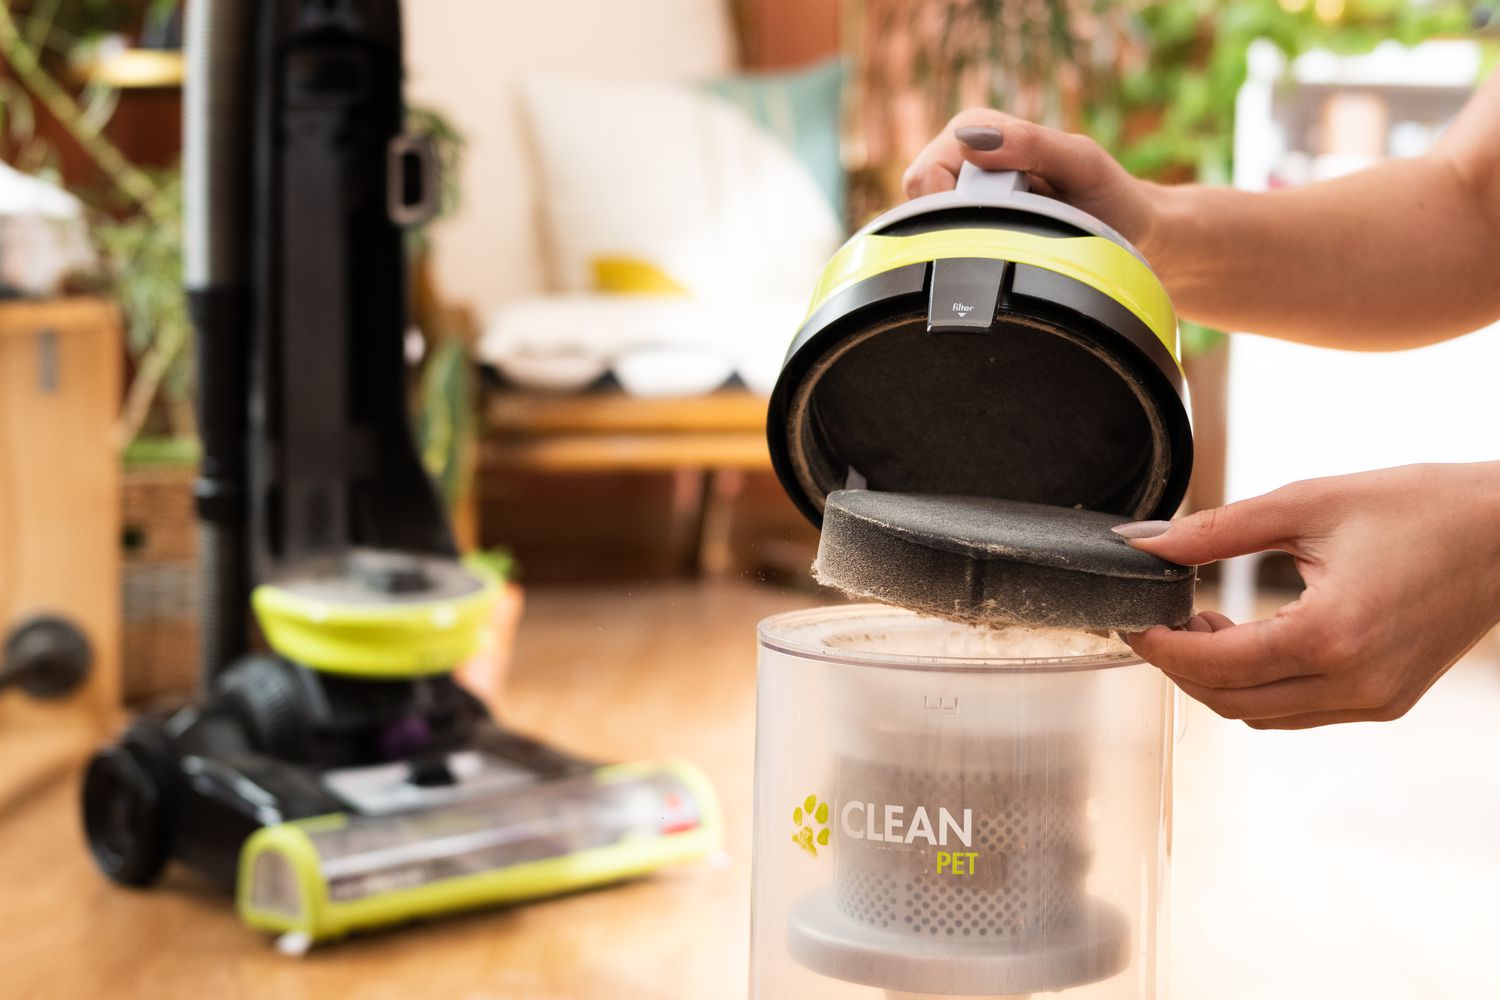 Can You Wash a Vacuum Cleaner Filter?